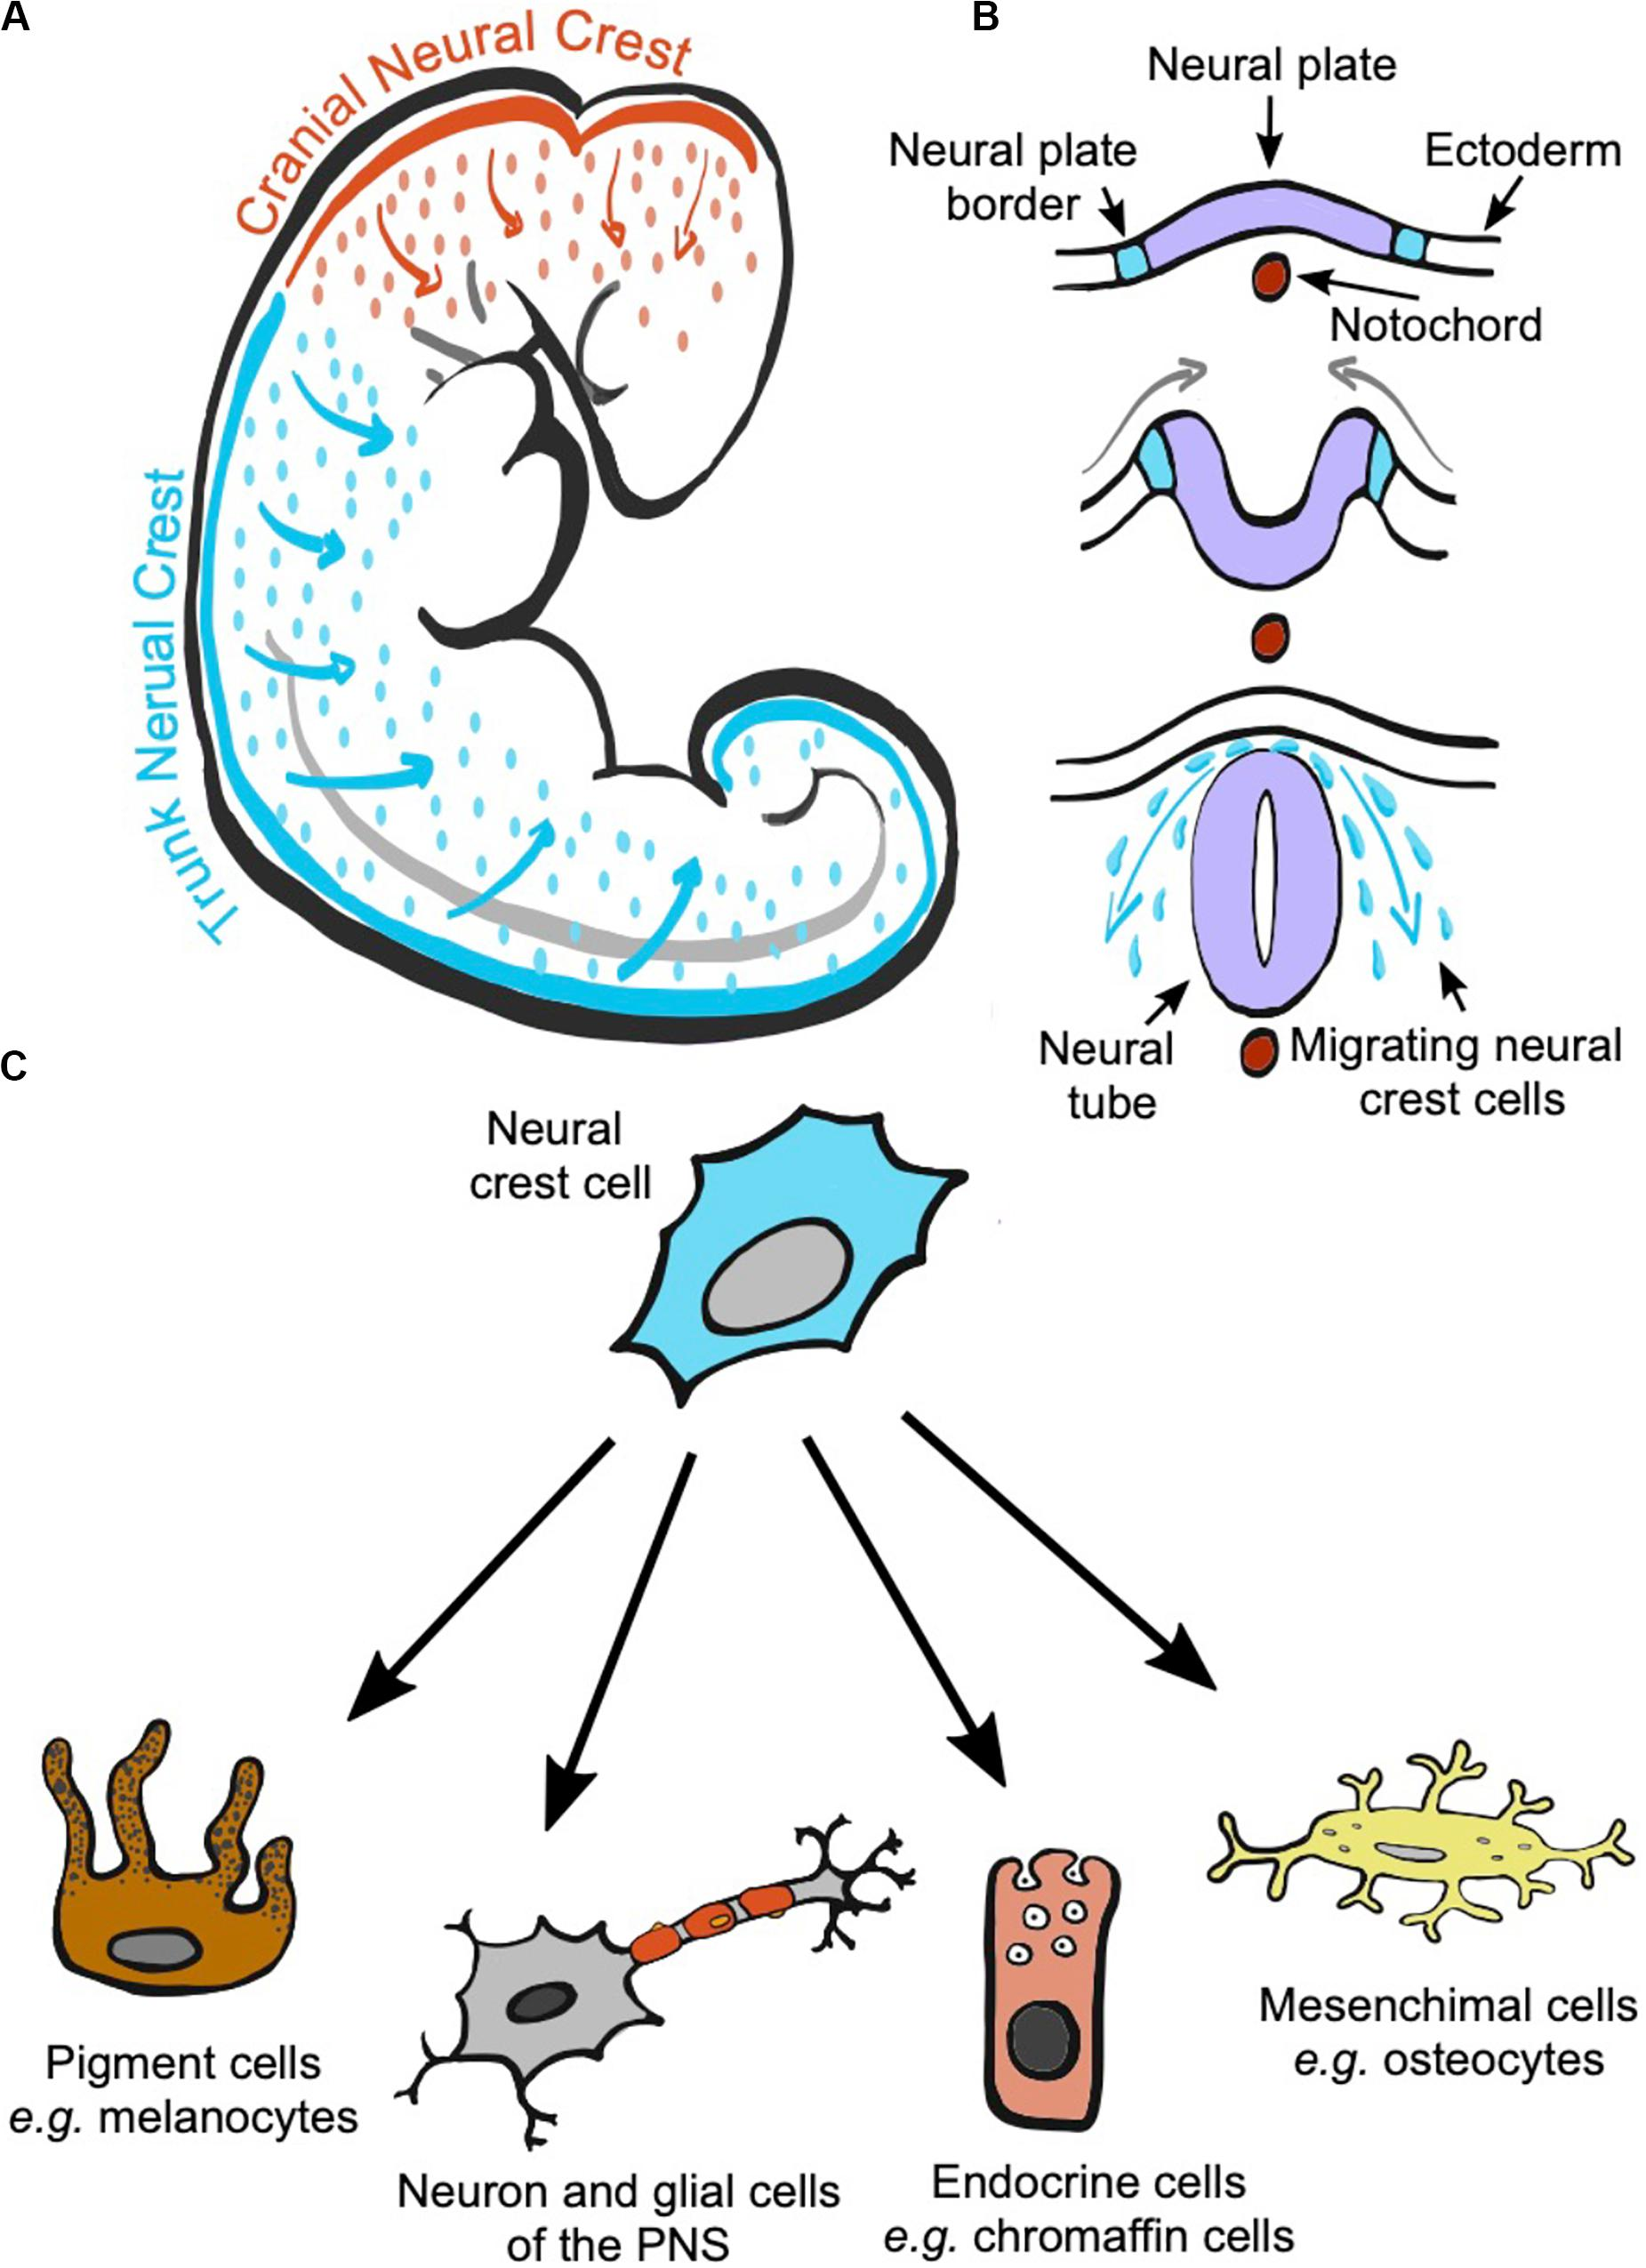 <p>Neural crest cells contribute to the parasympathetic innervation of the gut, playing a crucial role in regulating gastrointestinal function.</p>